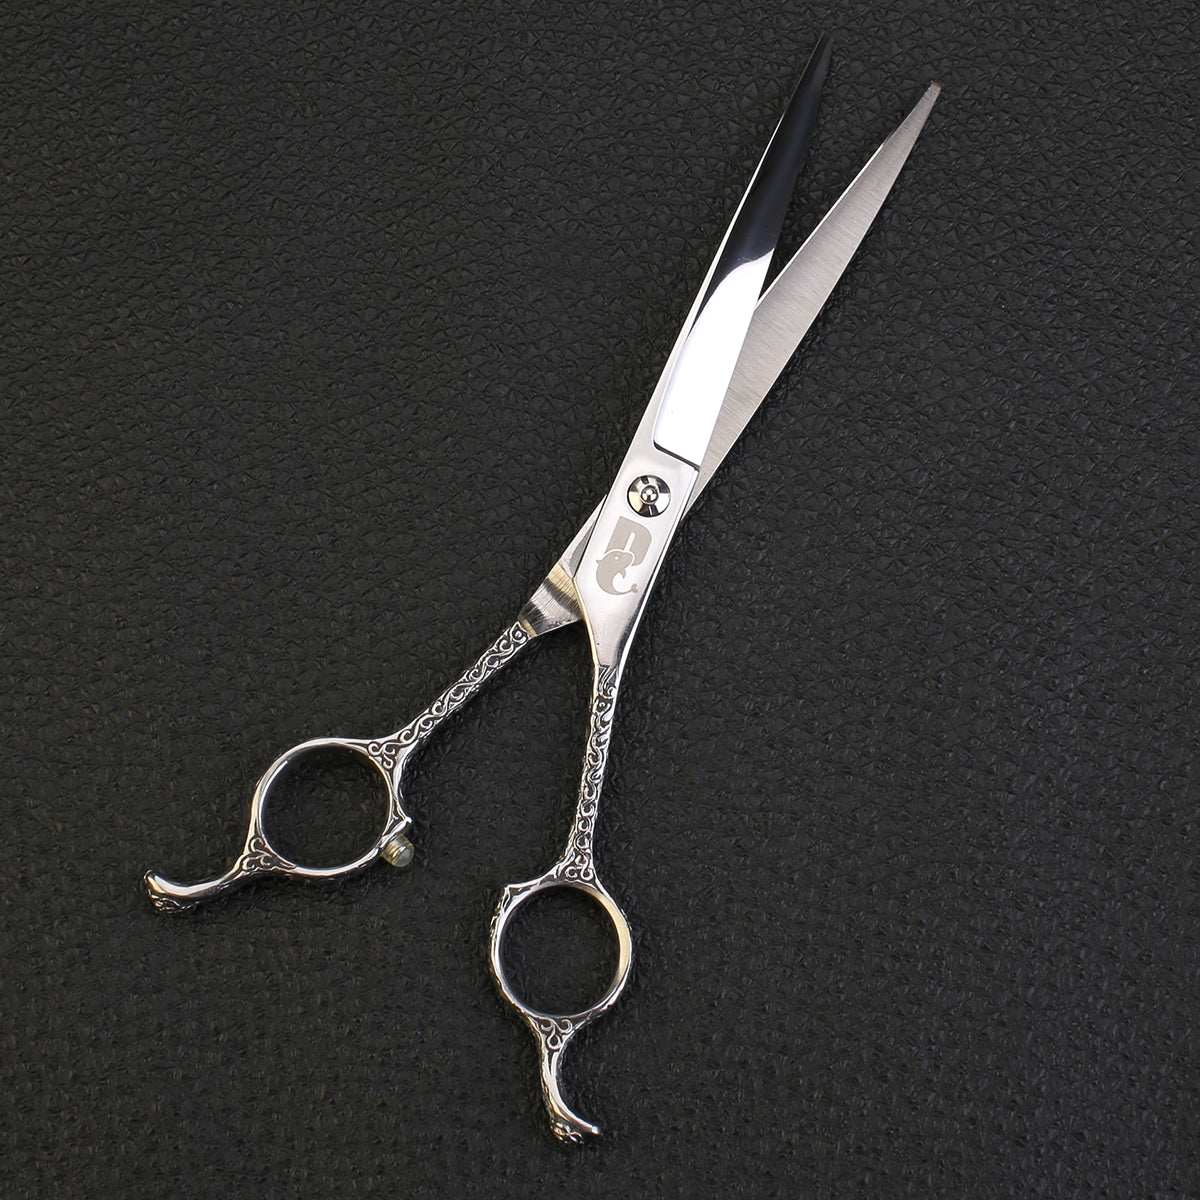 Super Curved Dog Grooming Scissors DC501